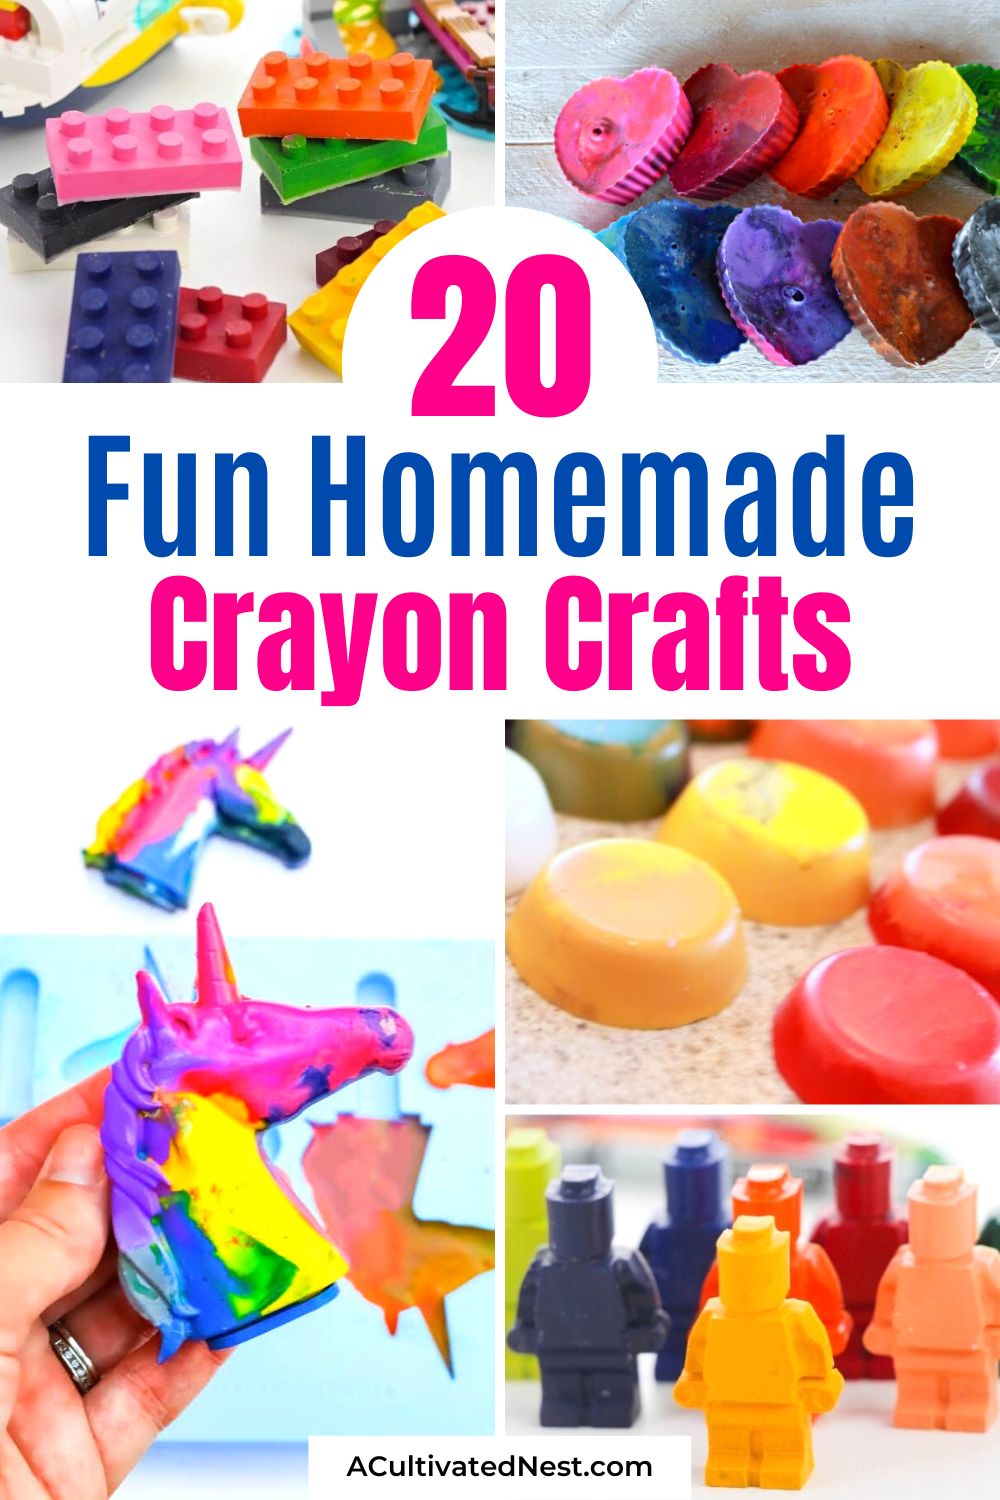 20 Fun Homemade Crayons- Looking for a unique way to upcycle old crayons? Try these fun homemade crayon ideas! Transform broken pieces into adorable shapes and colors, perfect for little hands. | #crafts #crayons #upcycling #kidsCrafts #ACulitvatedNest